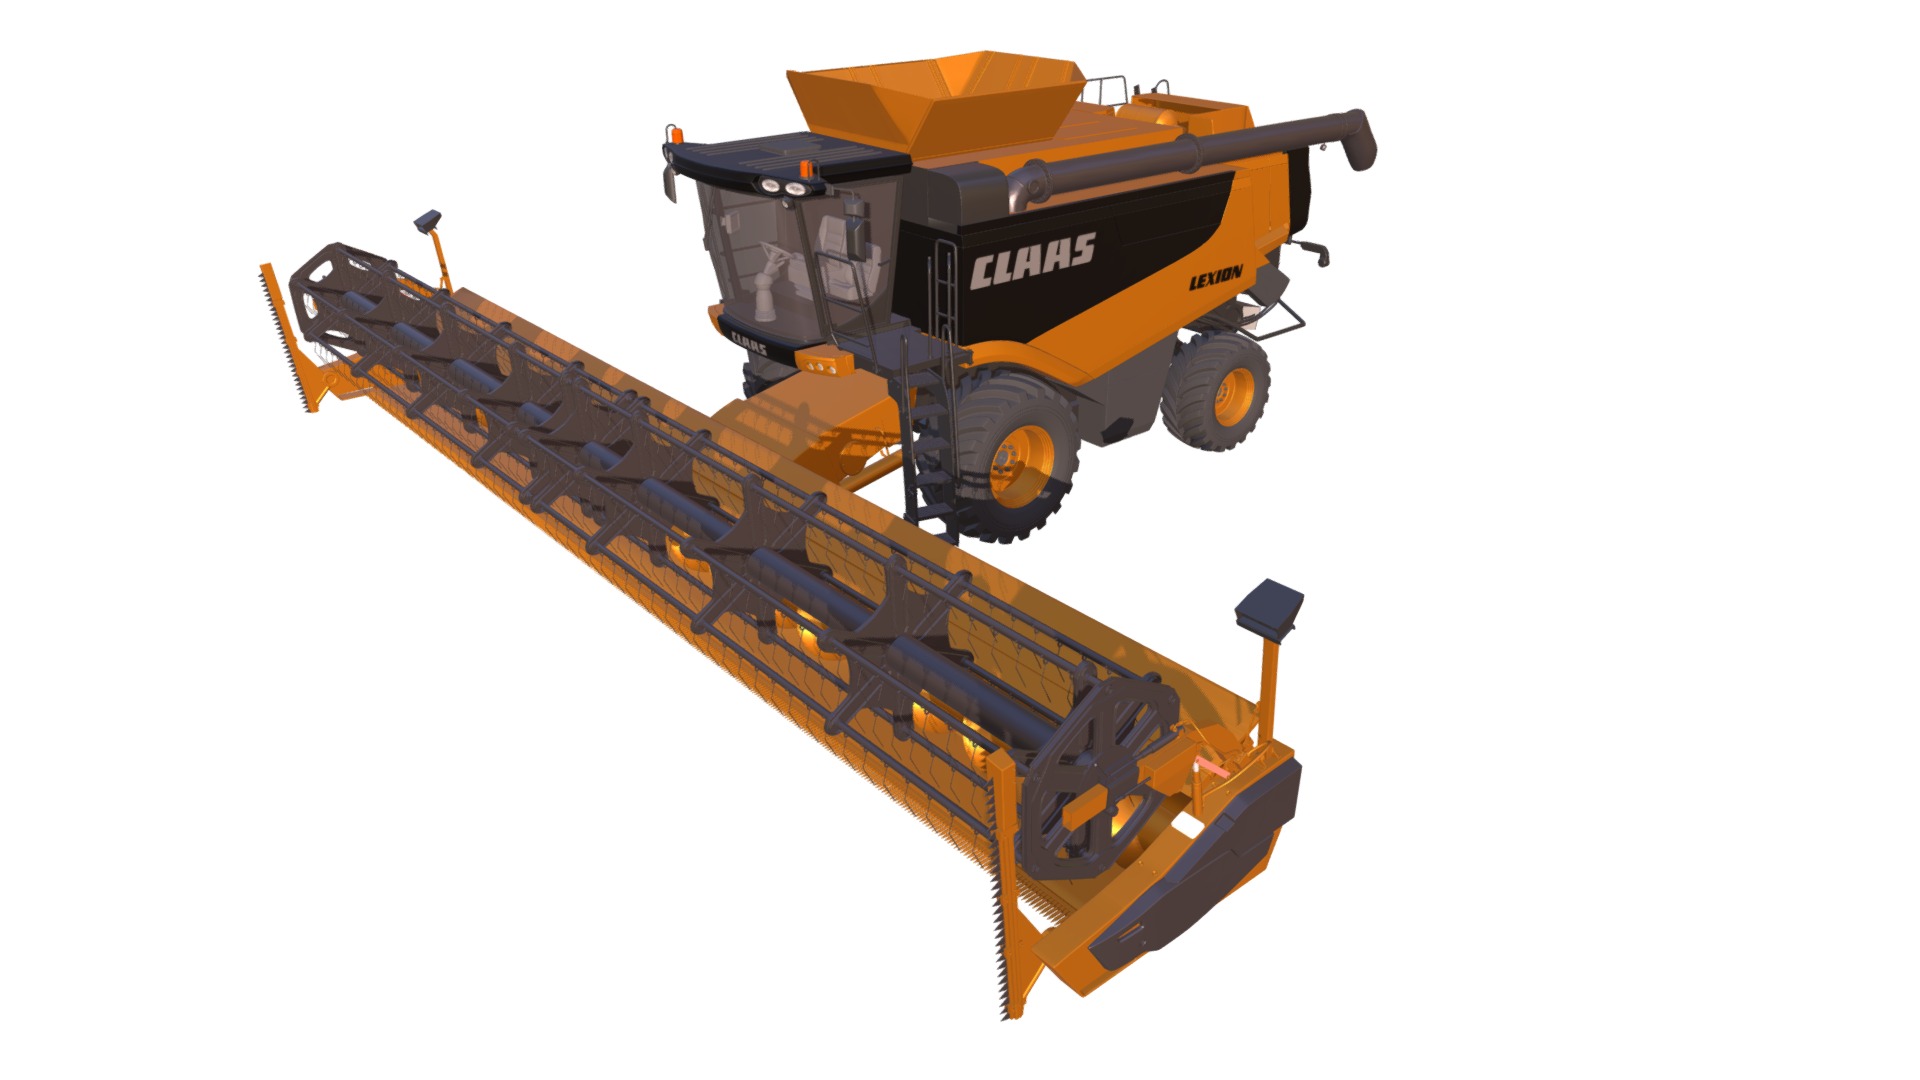 3D model Claas Lexion Combine - This is a 3D model of the Claas Lexion Combine. The 3D model is about a yellow and black machine.